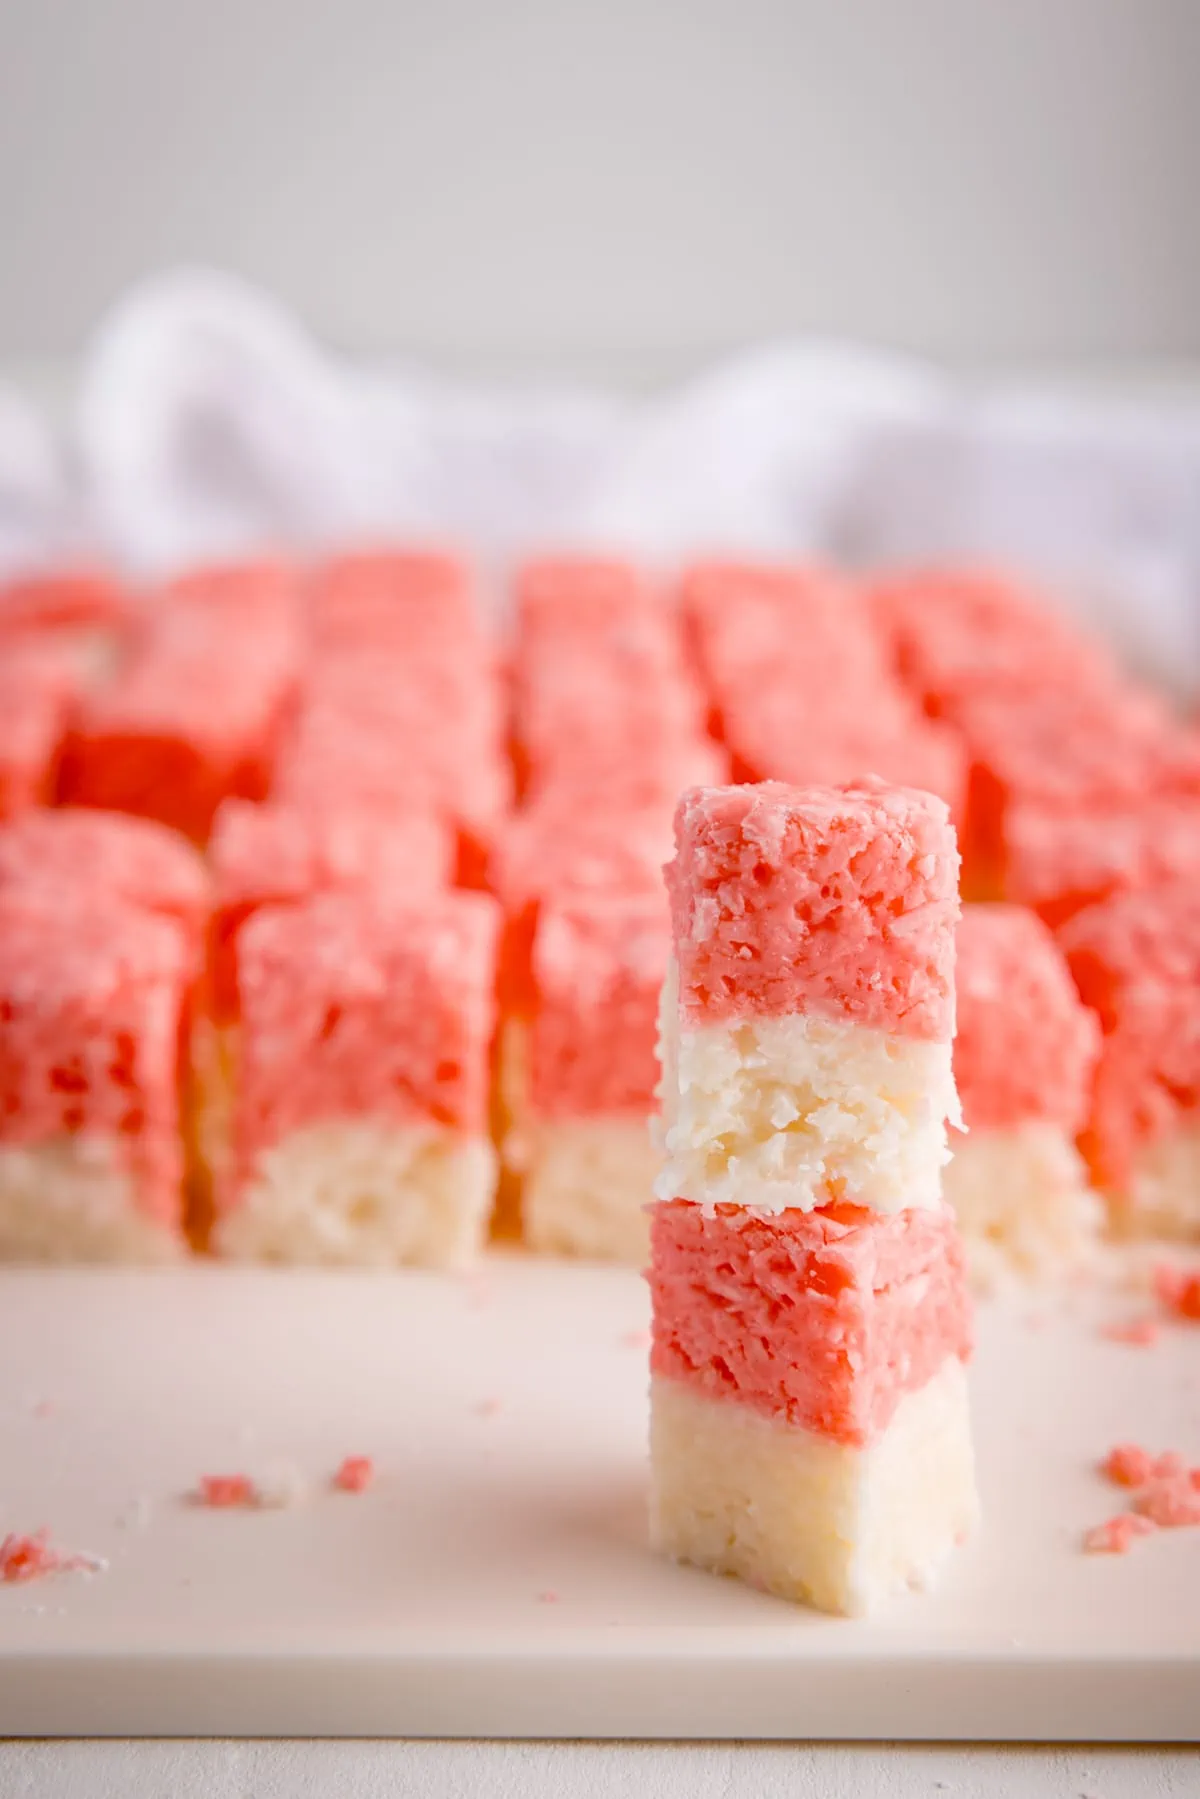 Pink and white coconut ice chopped into little cubes on a white board. There is a white napkin i the background.